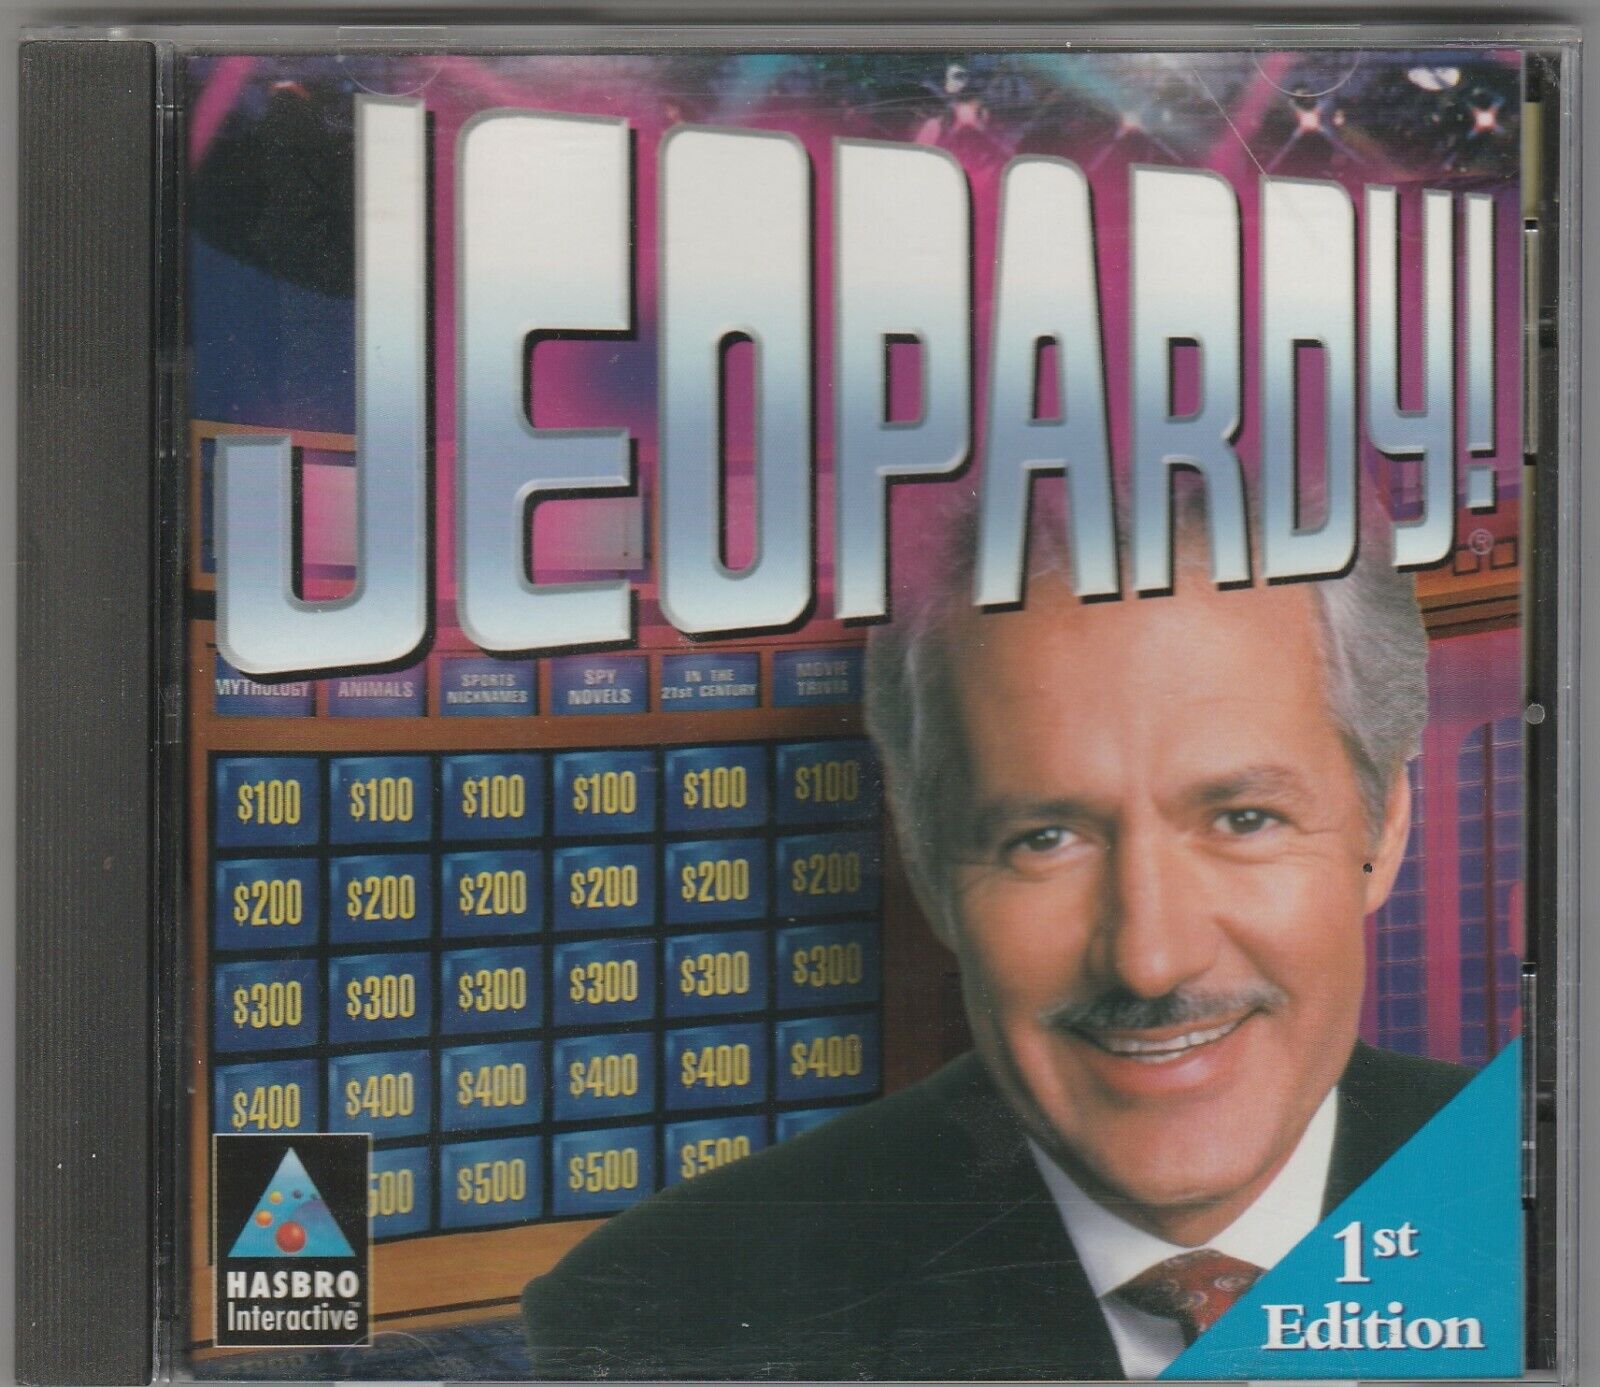 Jeopardy CD-Rom Game 1st Edition by Hasbro Interactive  1998 for Win 95/98